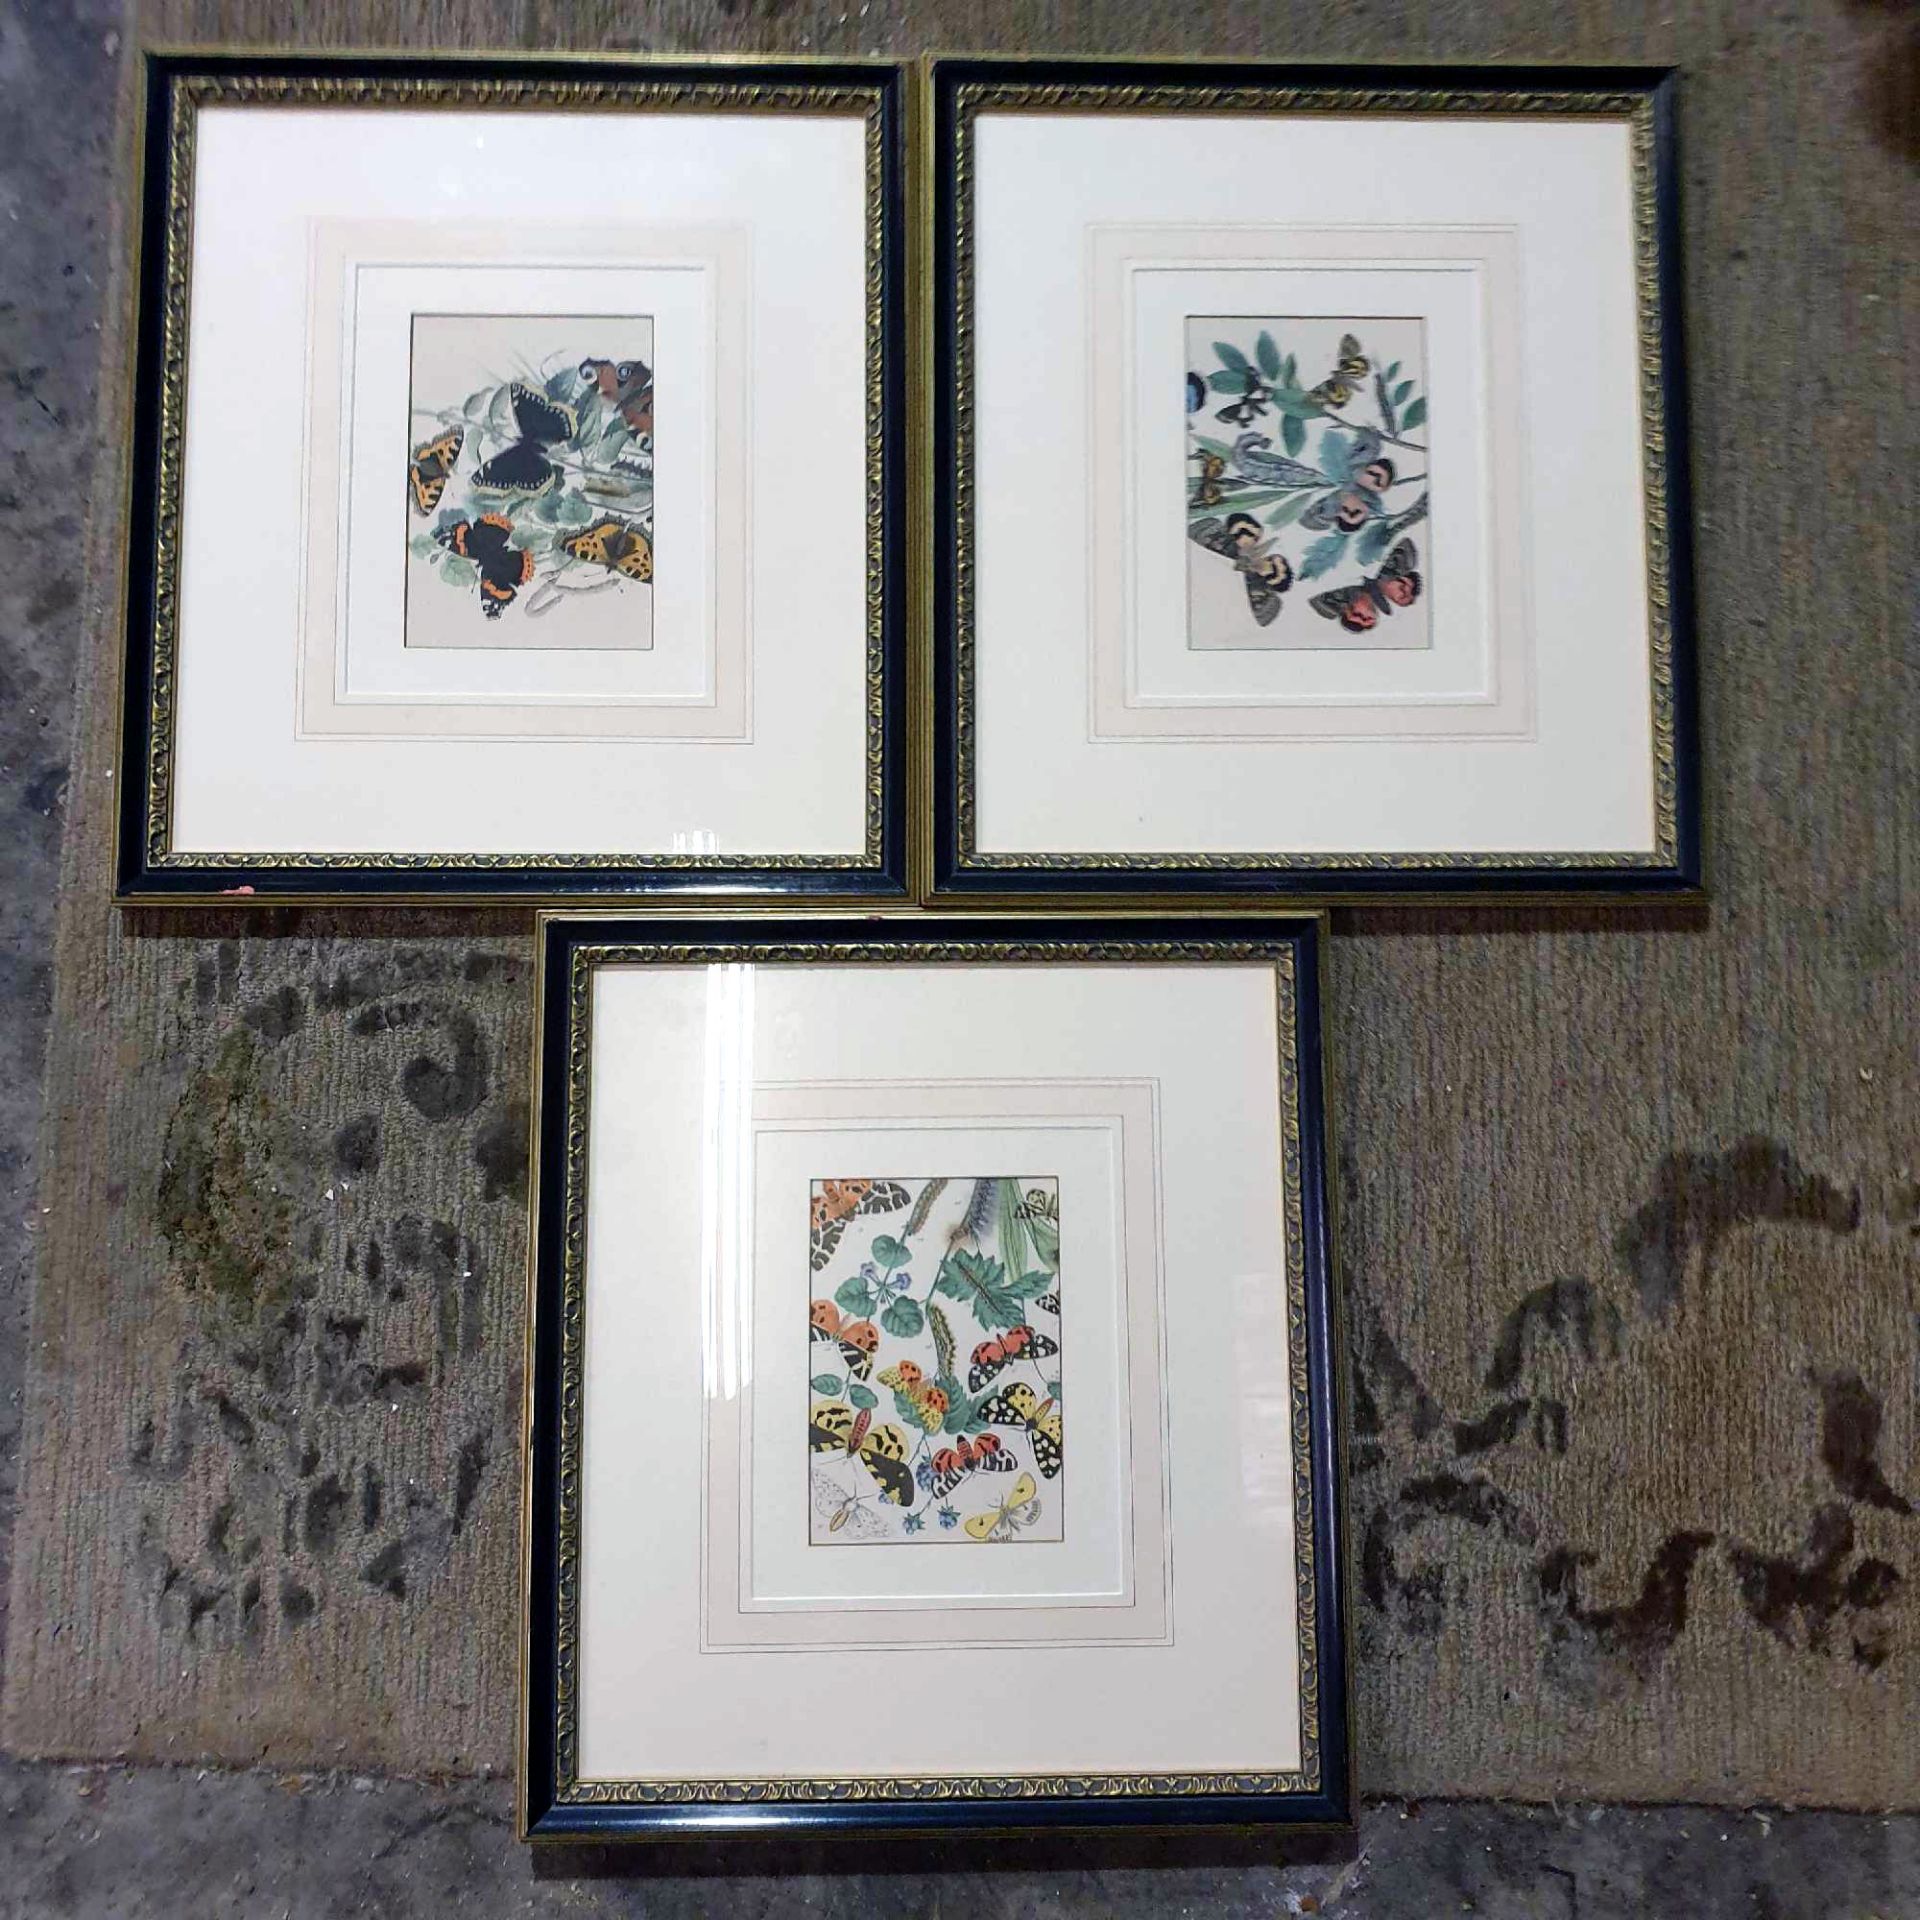 3 x Entomology Studies Of Butterflies And Moths Glazed And Framed 46 x 50cm